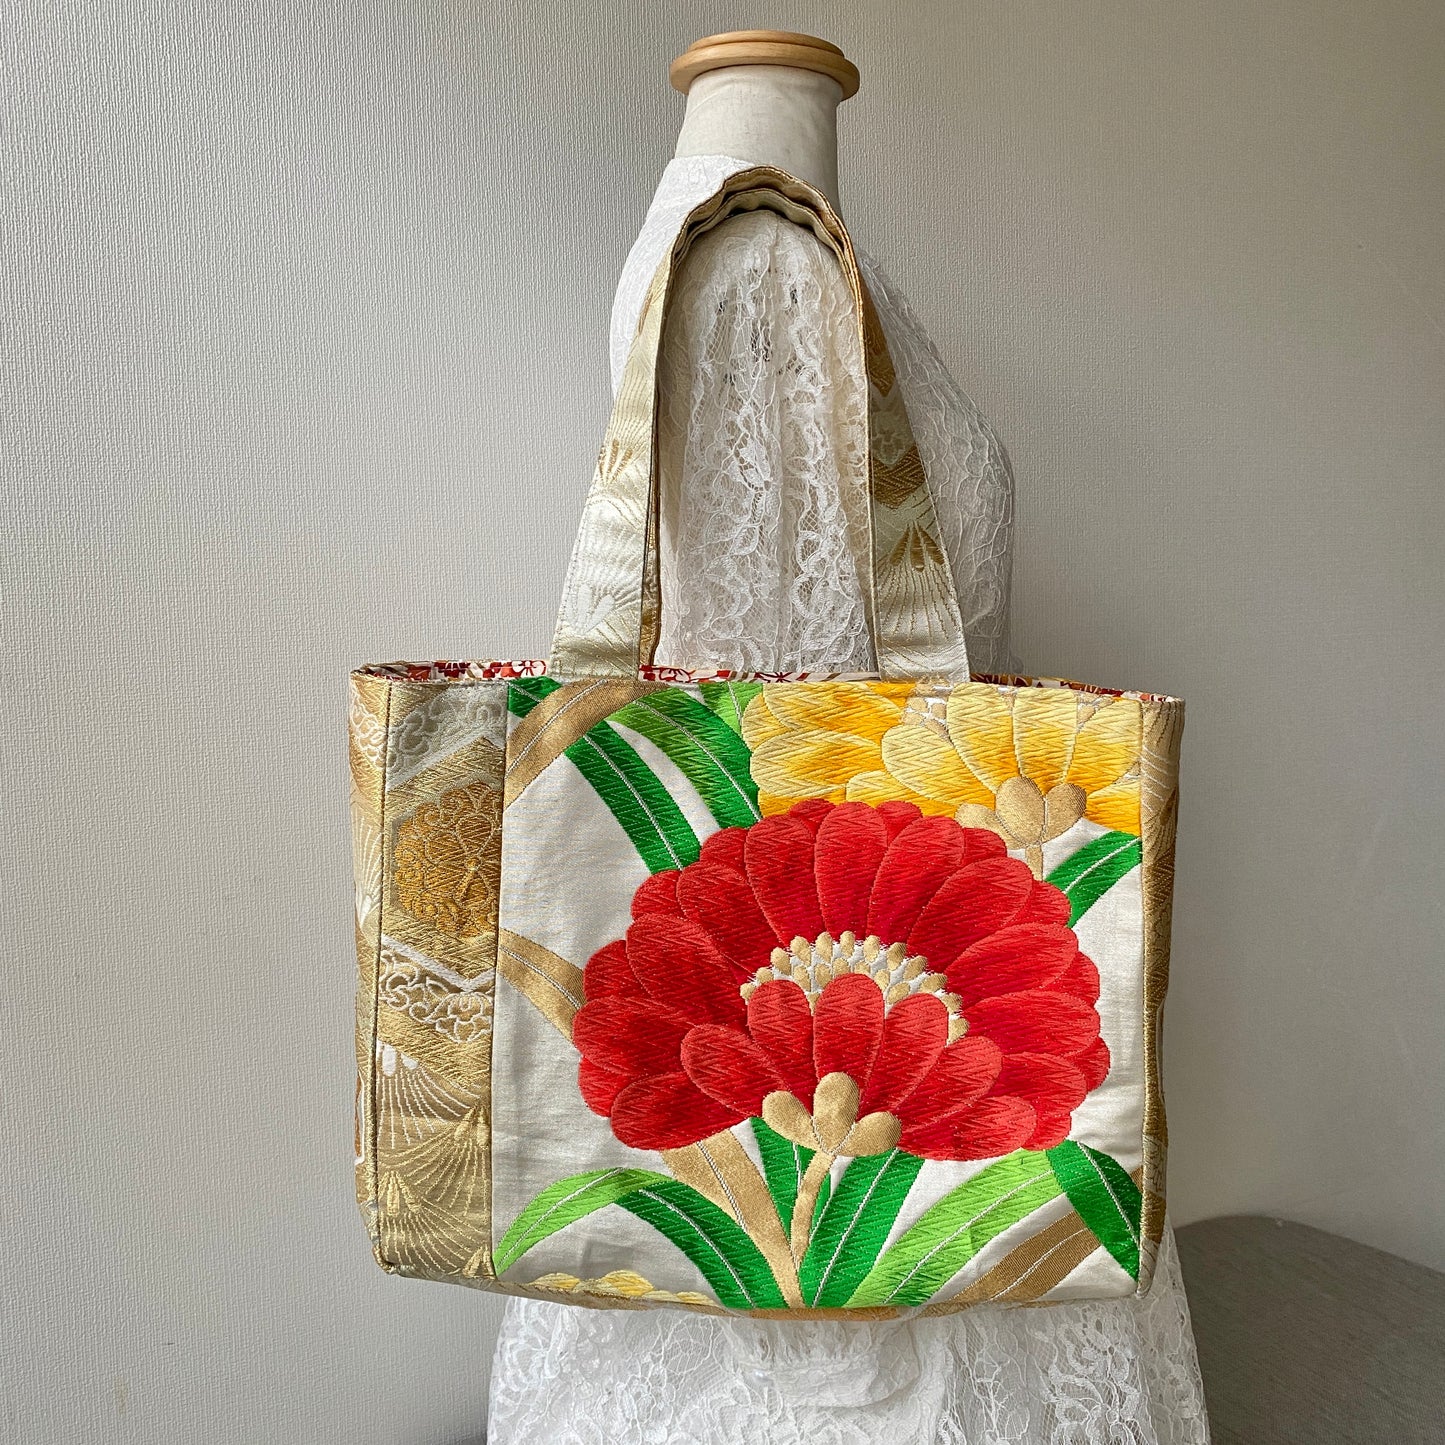 Silk Obi tote bag, Handcrafted, Upcycled